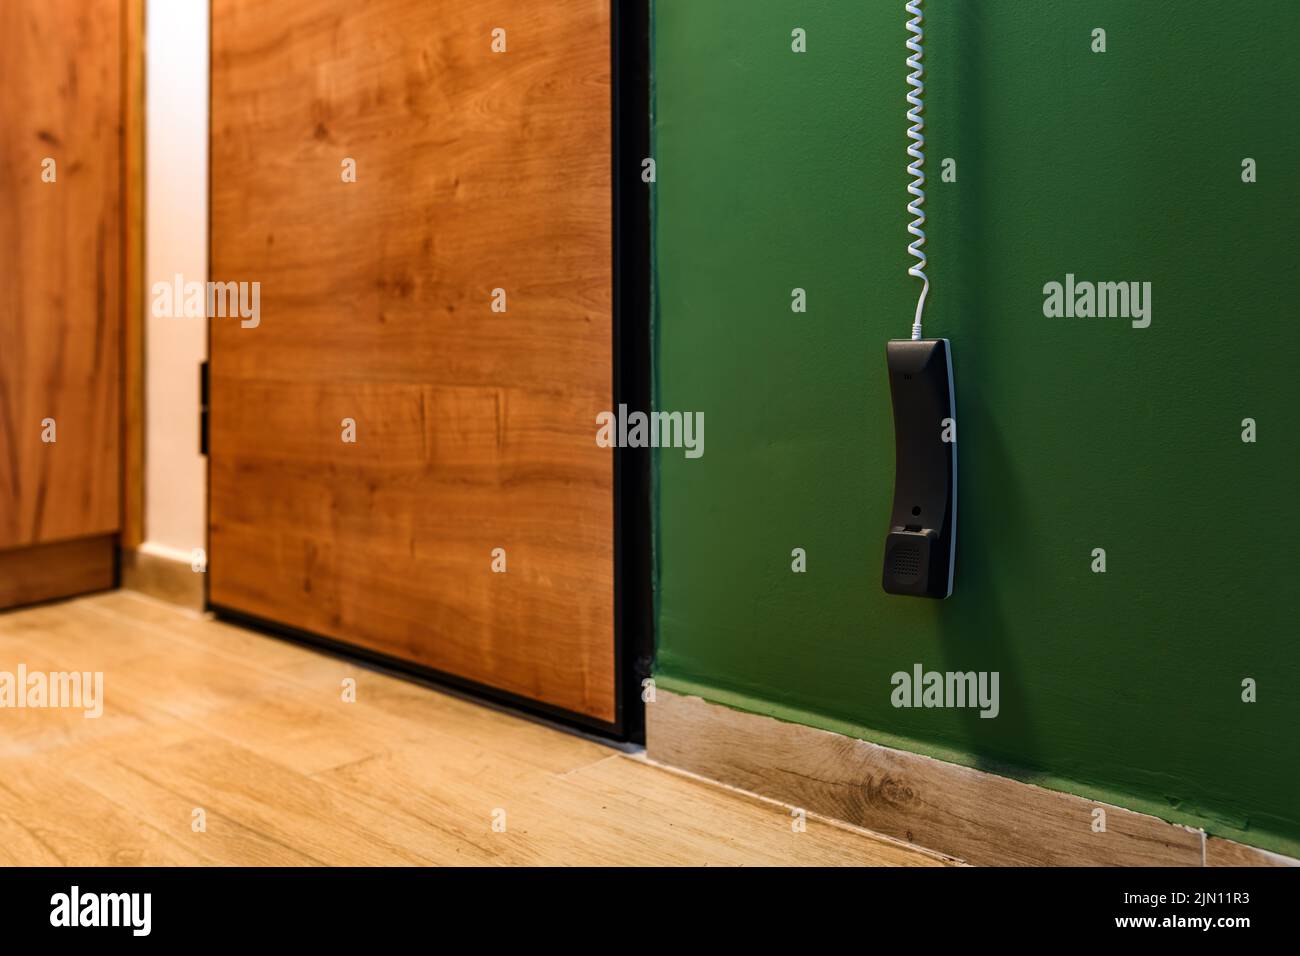 Apartment intercom phone hanging by the entrance door, selective focus Stock Photo